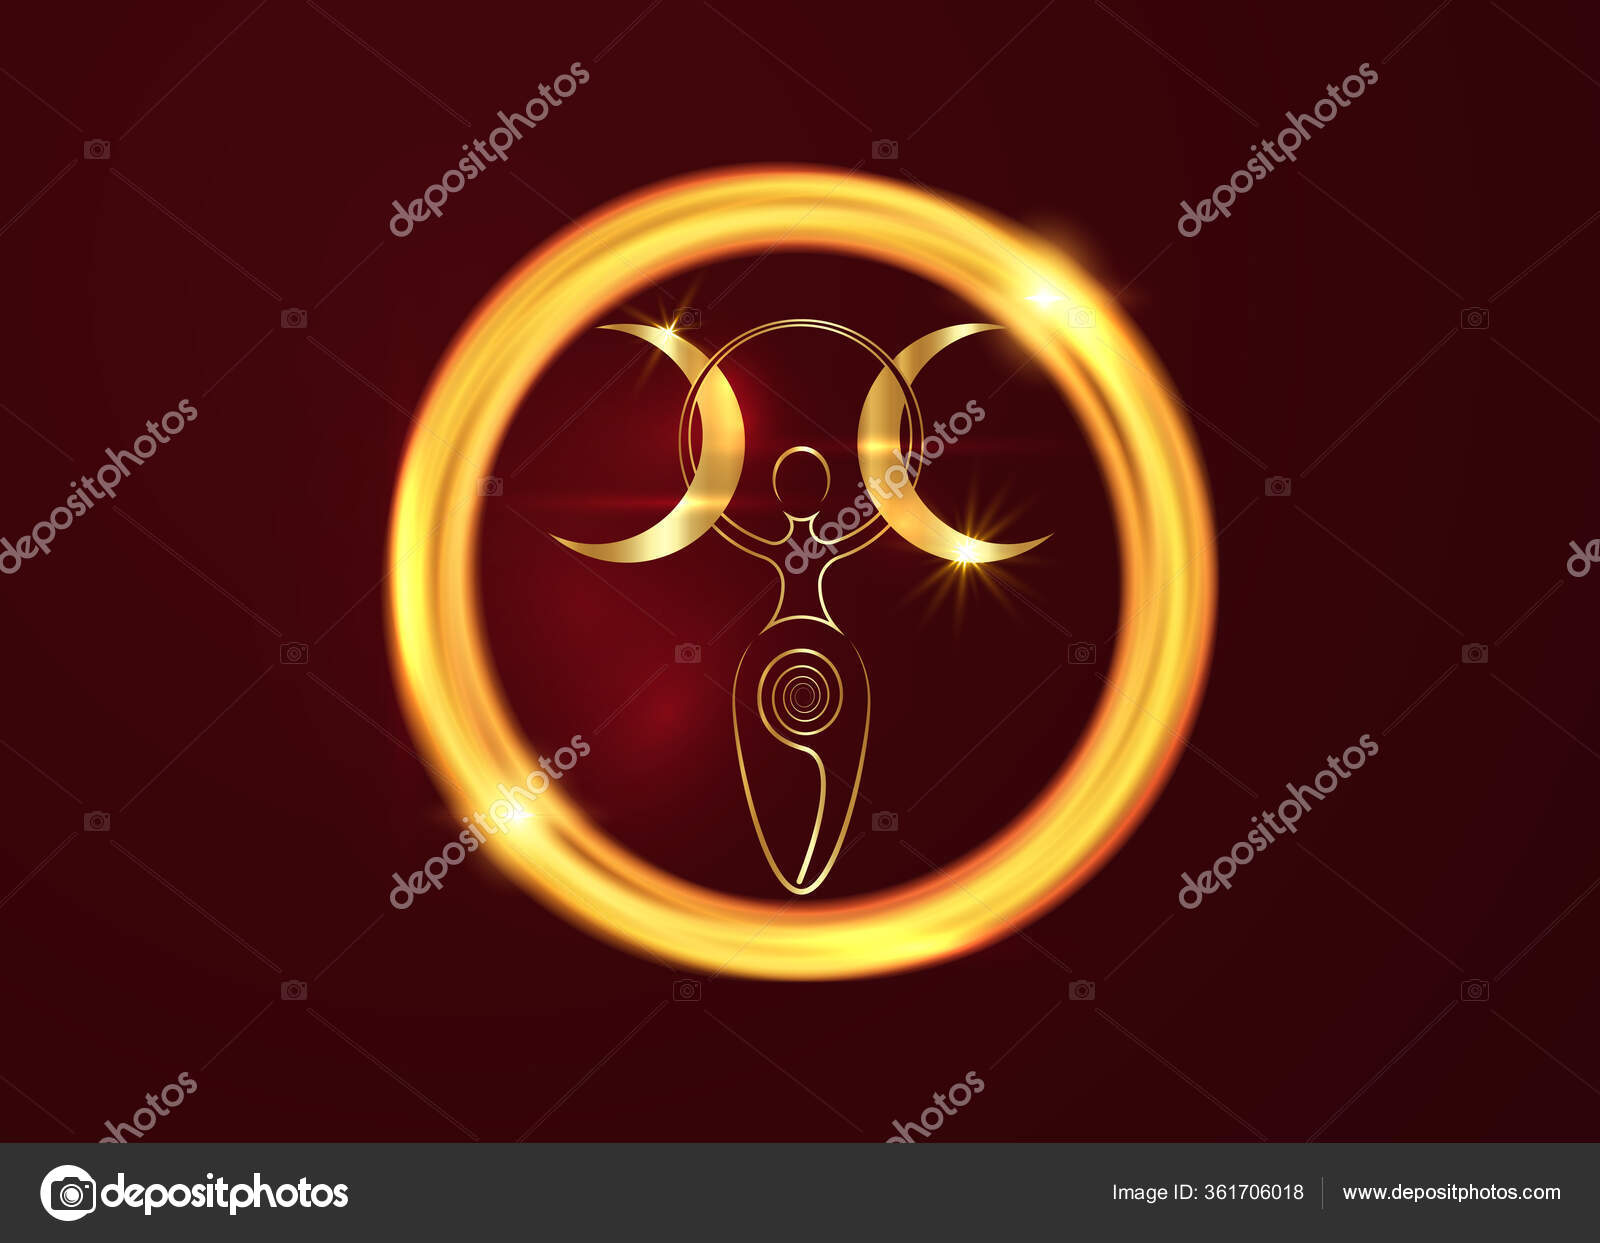 Gold Spiral Goddess Fertility Triple Moon Wiccan Spiral Cycle Life Stock Vector by ©robin_ph 361706018